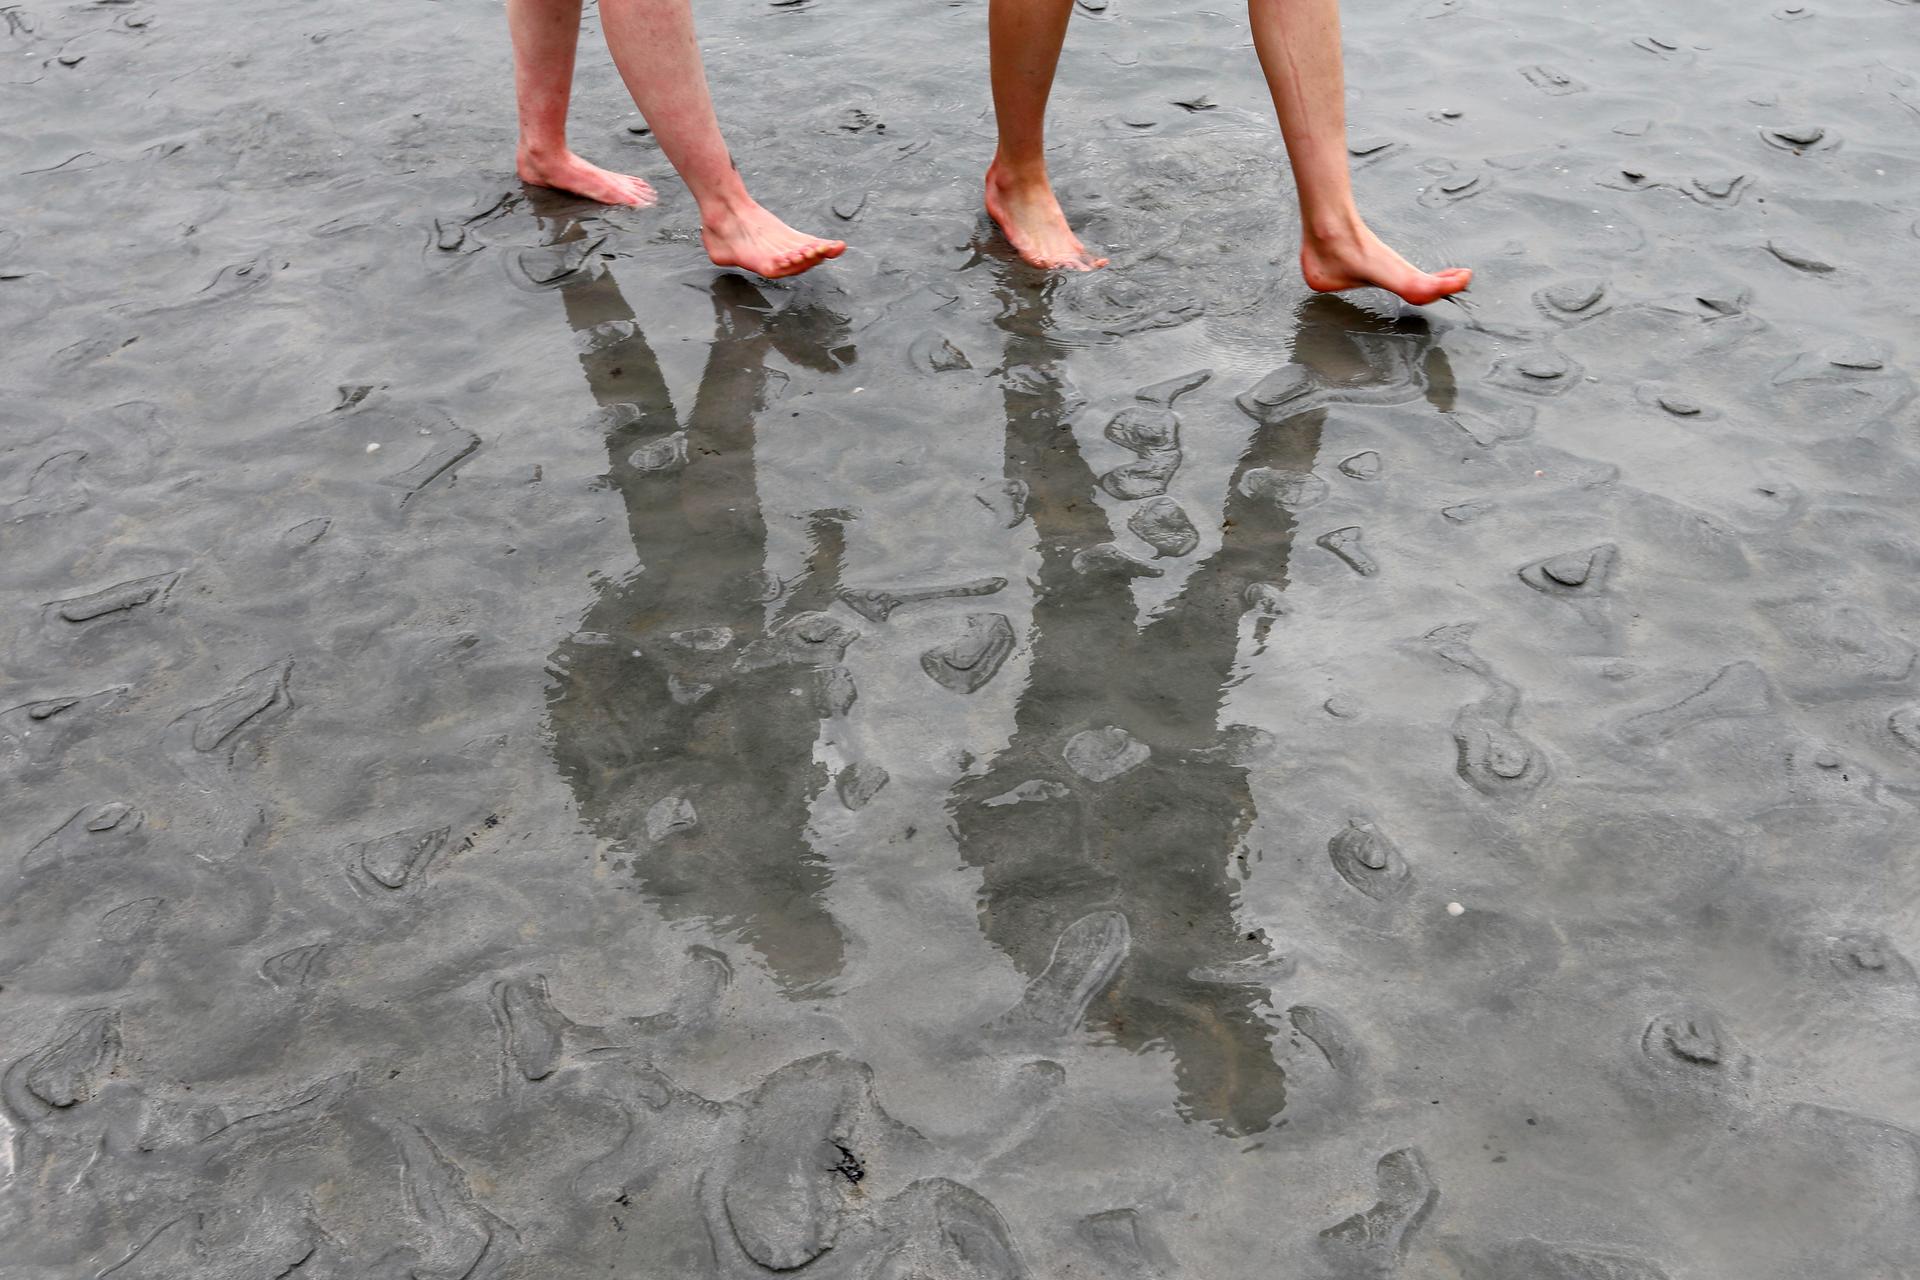 People cast shadows on the sand as they walk at low tide.